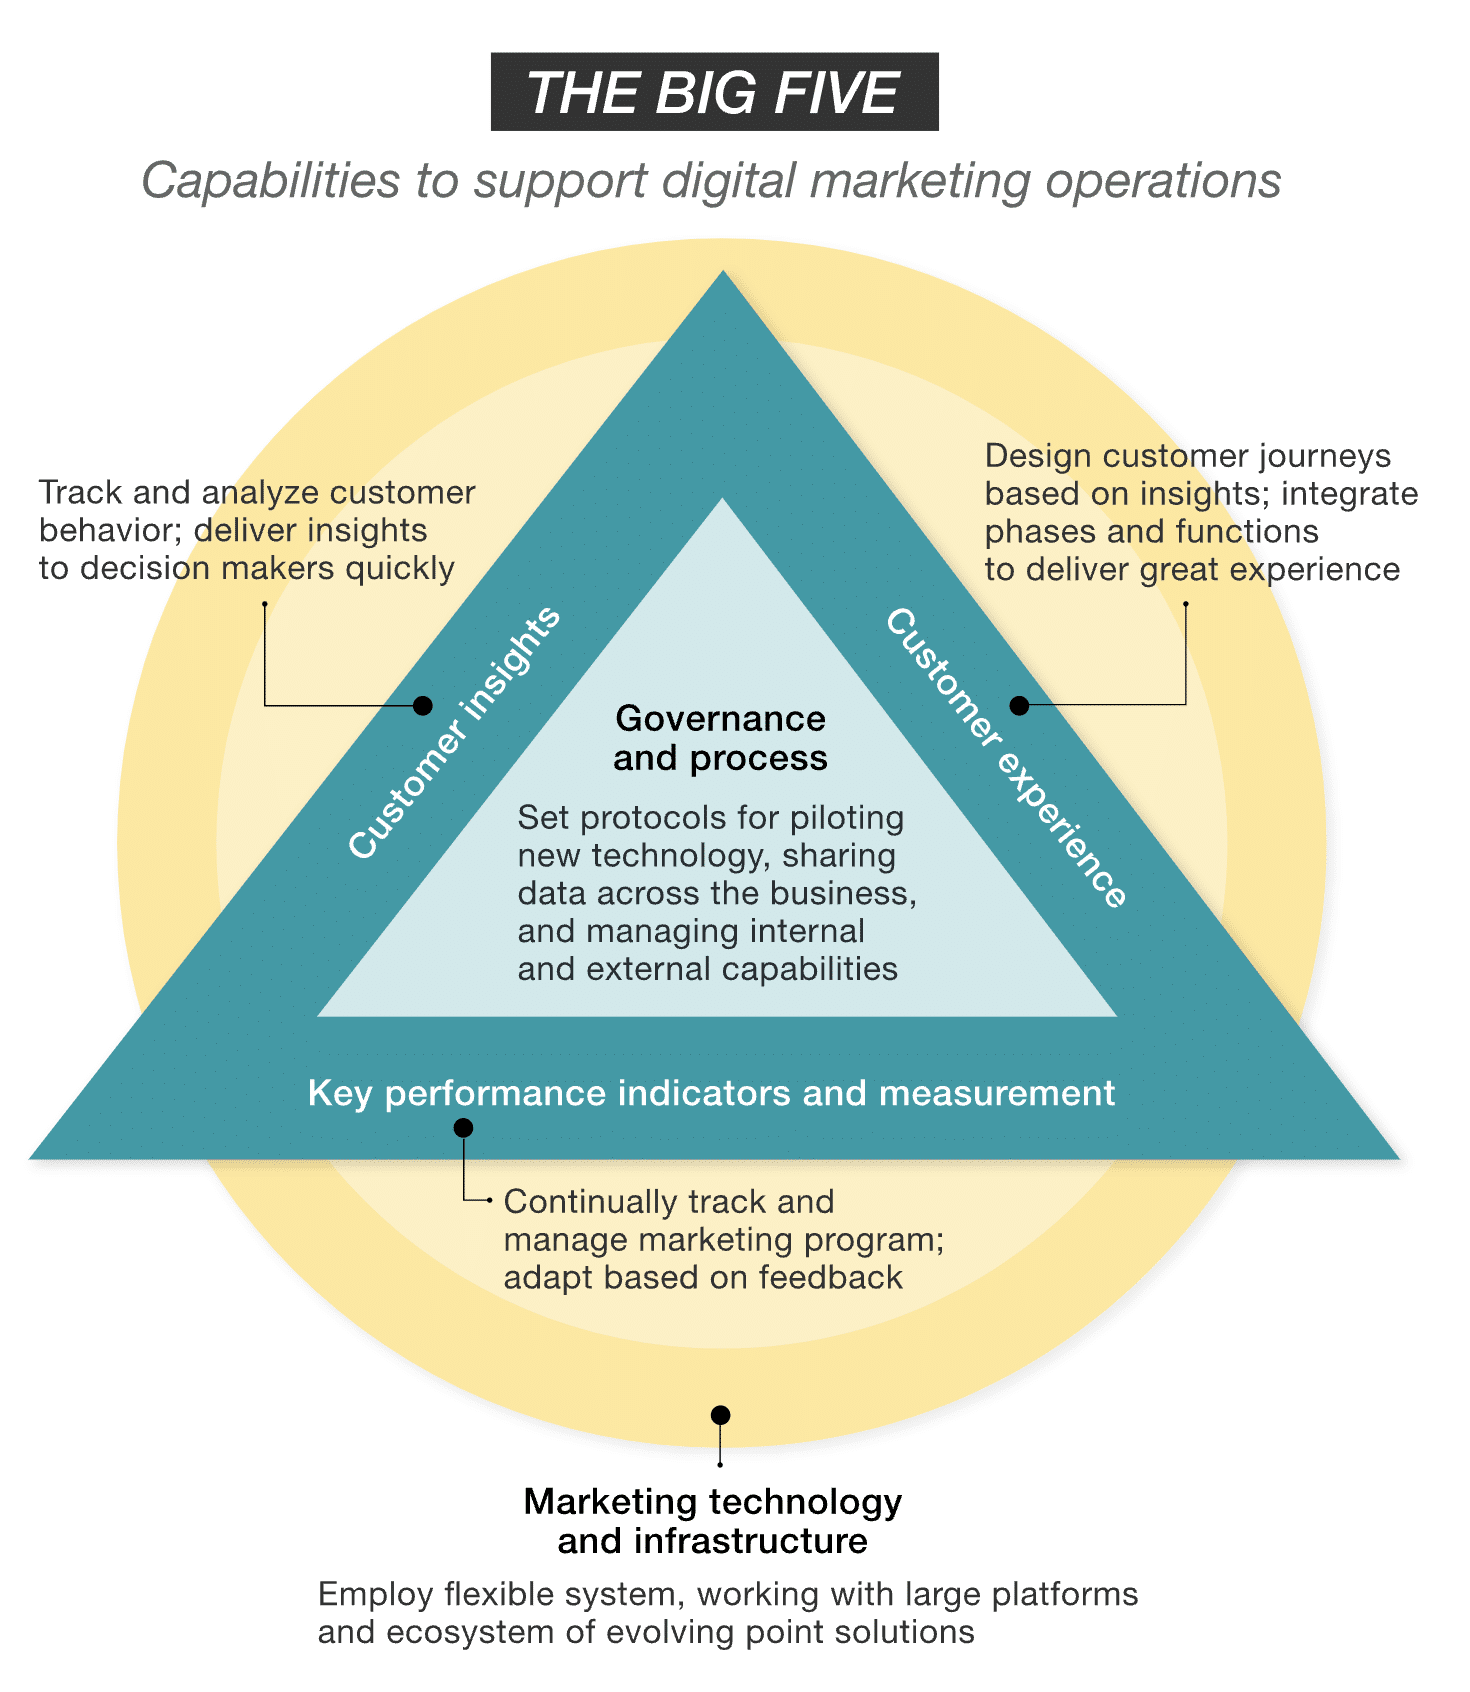 graphic shows the 5 capabilities to support digital marketing and content operations